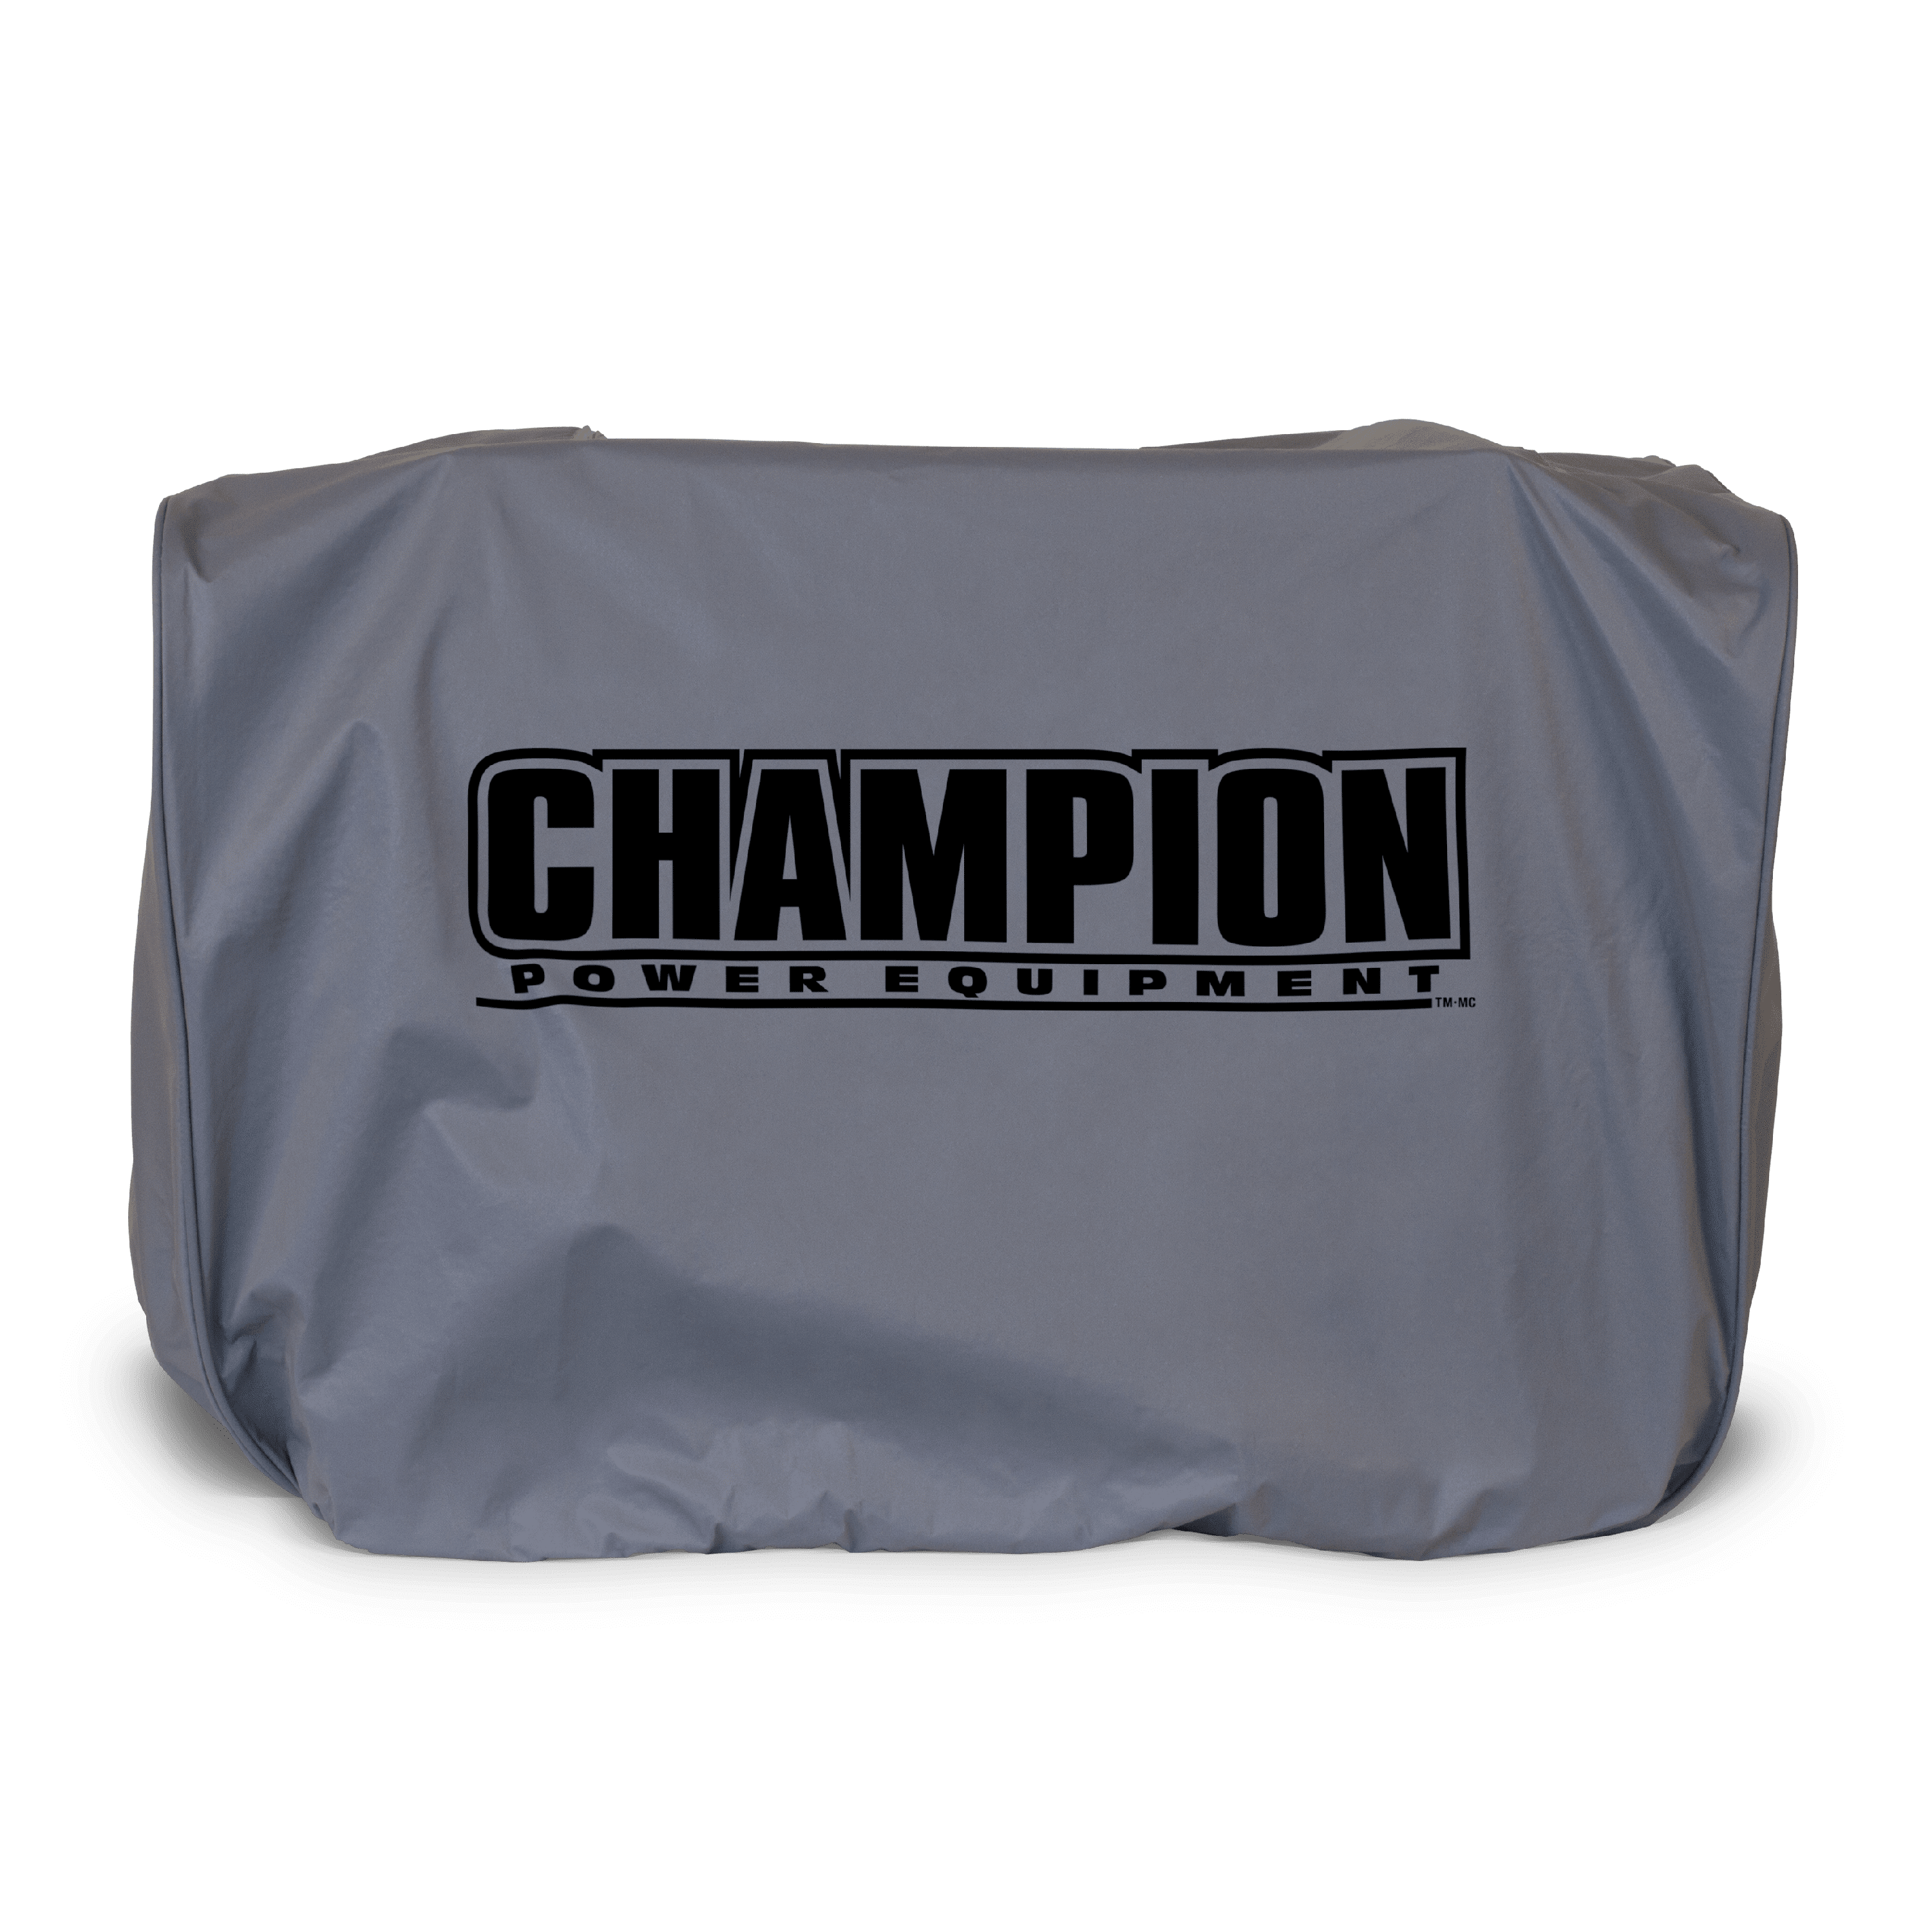 30.7" Generator Storage Cover For Champion Portable Weather-Resistant 